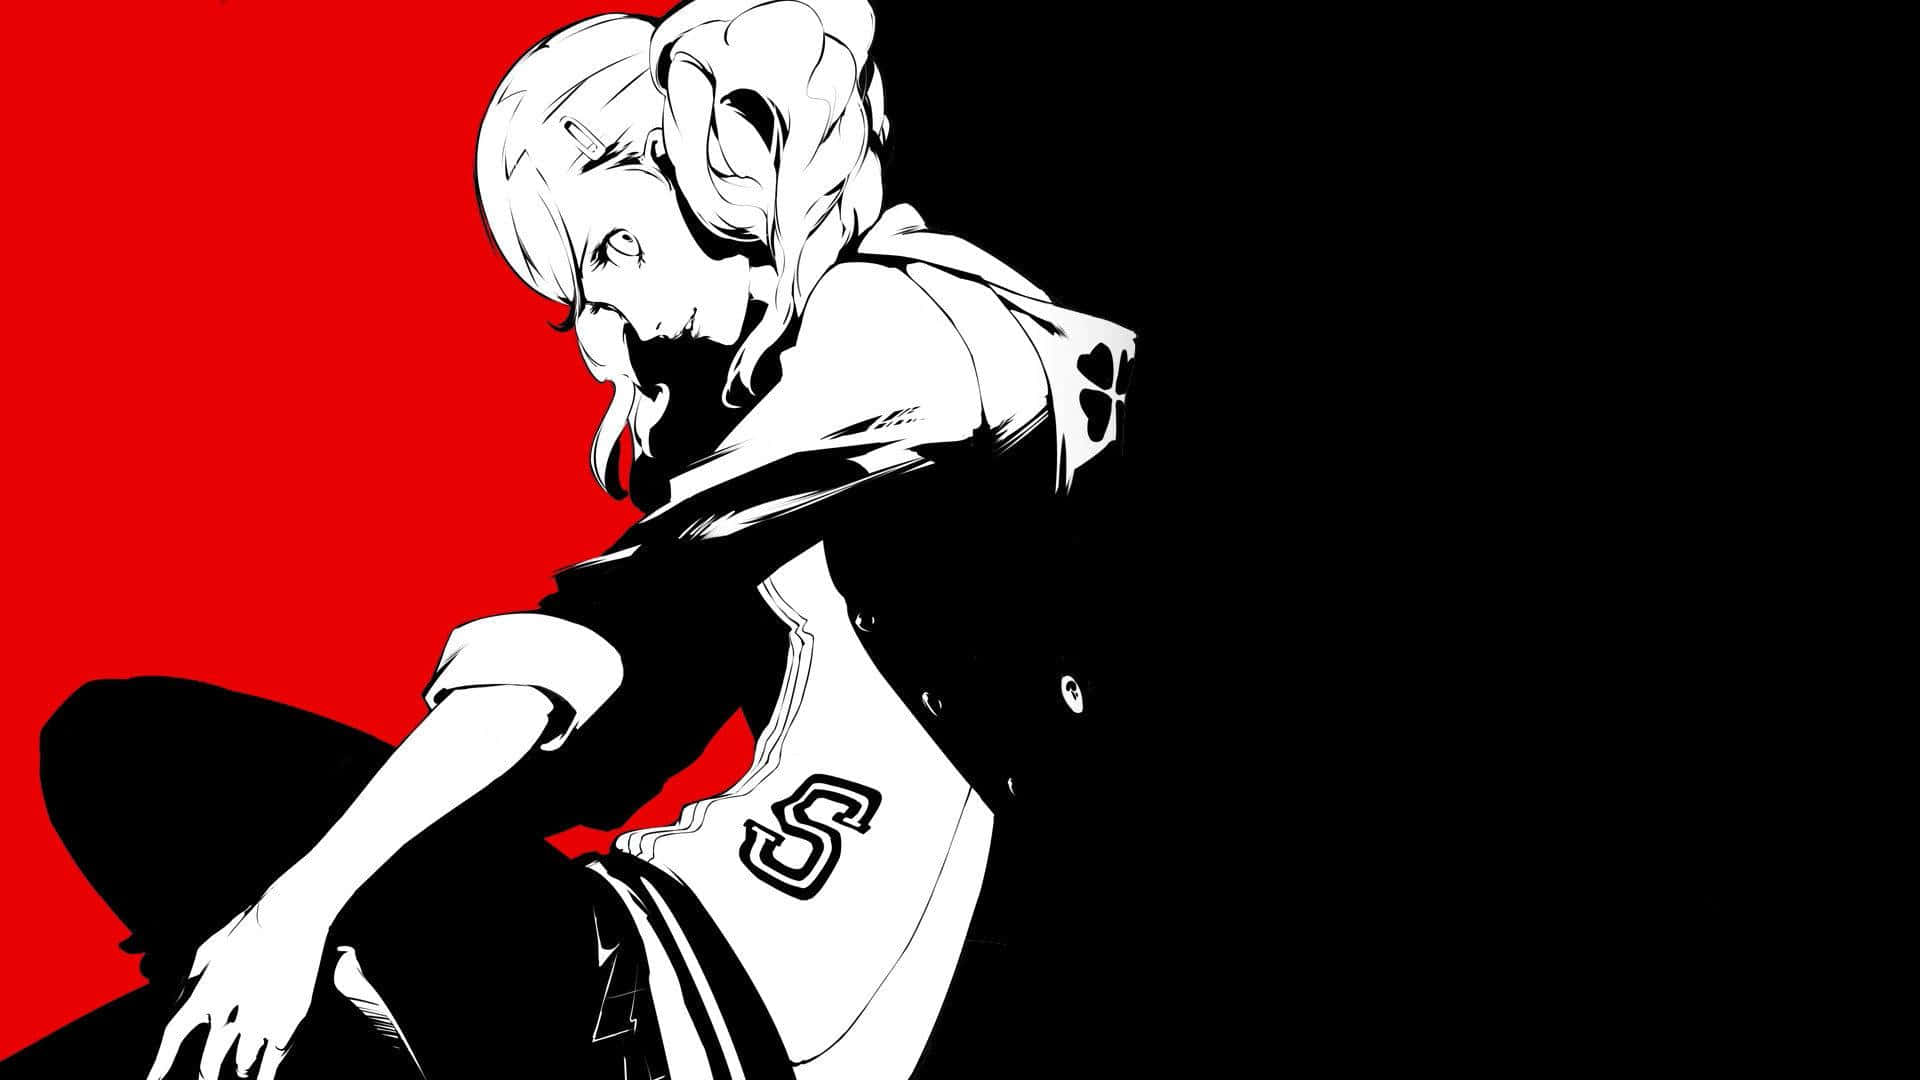 Take on the challenges of Persona 5 in a vibrant cityscape